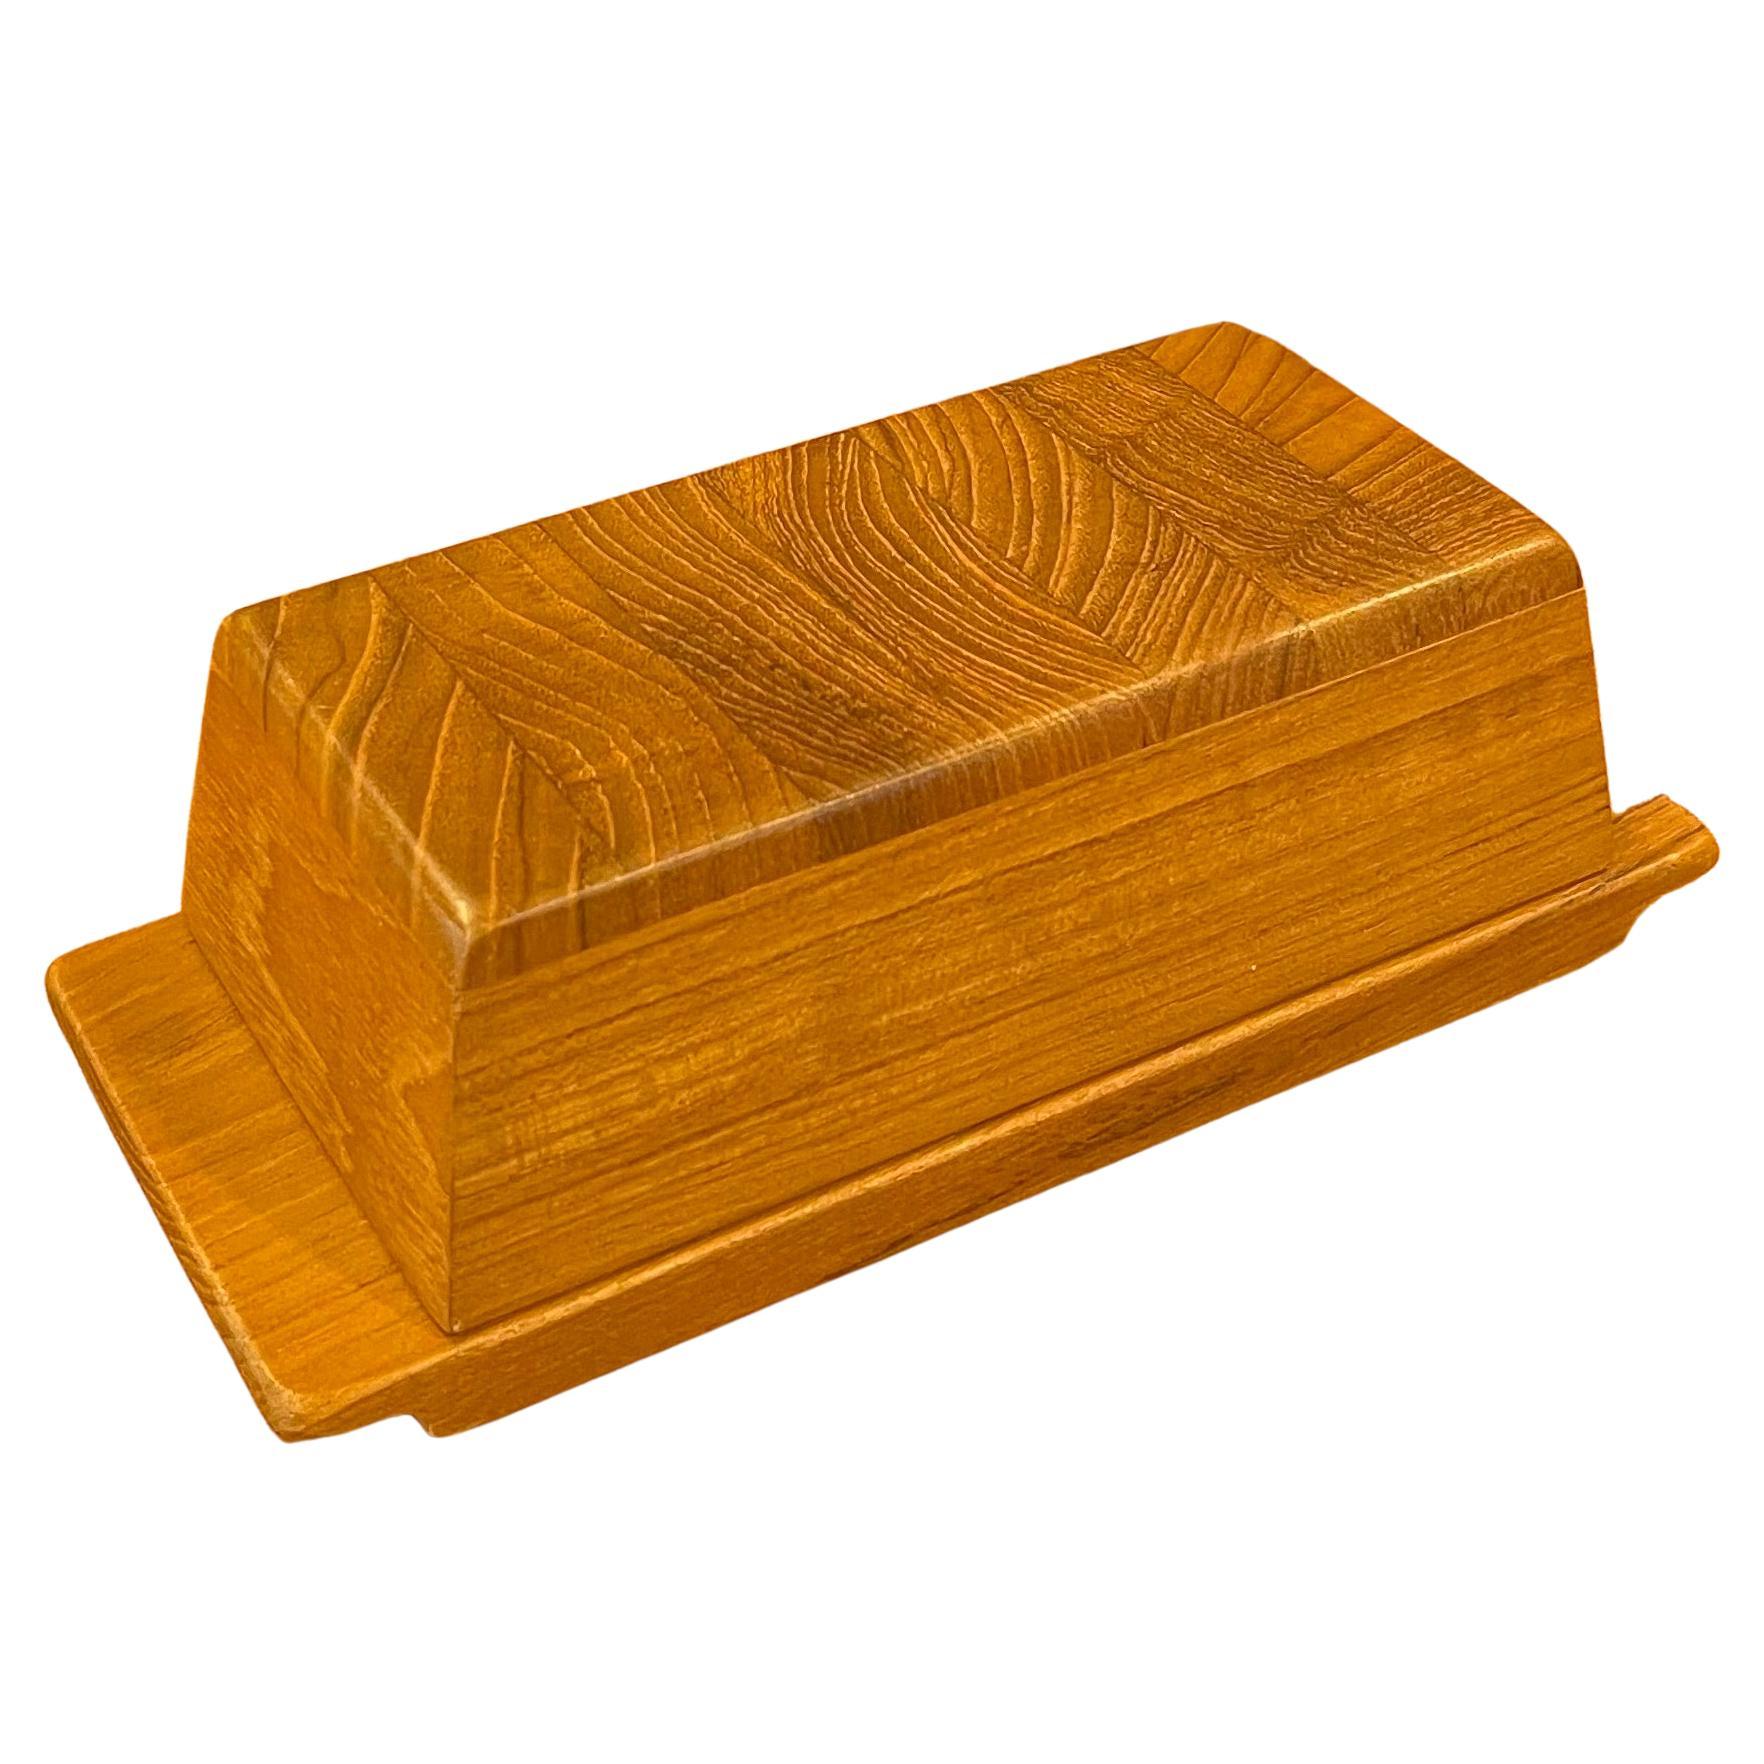 Staved Teak Lidded Butter Box / Container by Sigvard Nilsson for Sowe Konst For Sale